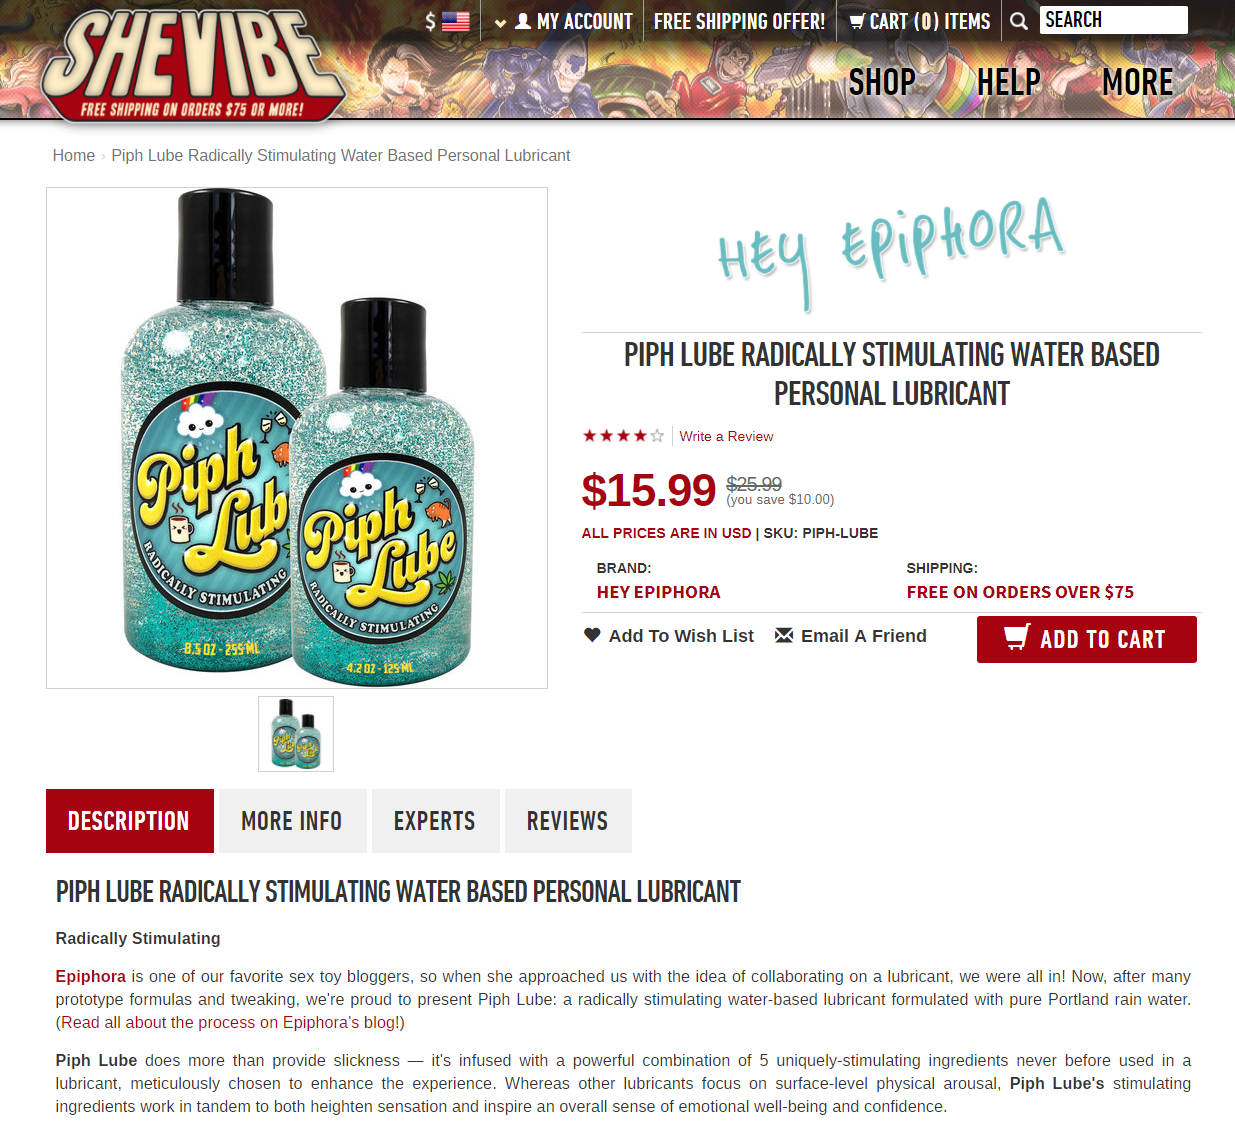 Piph Lube for sale on SheVibe